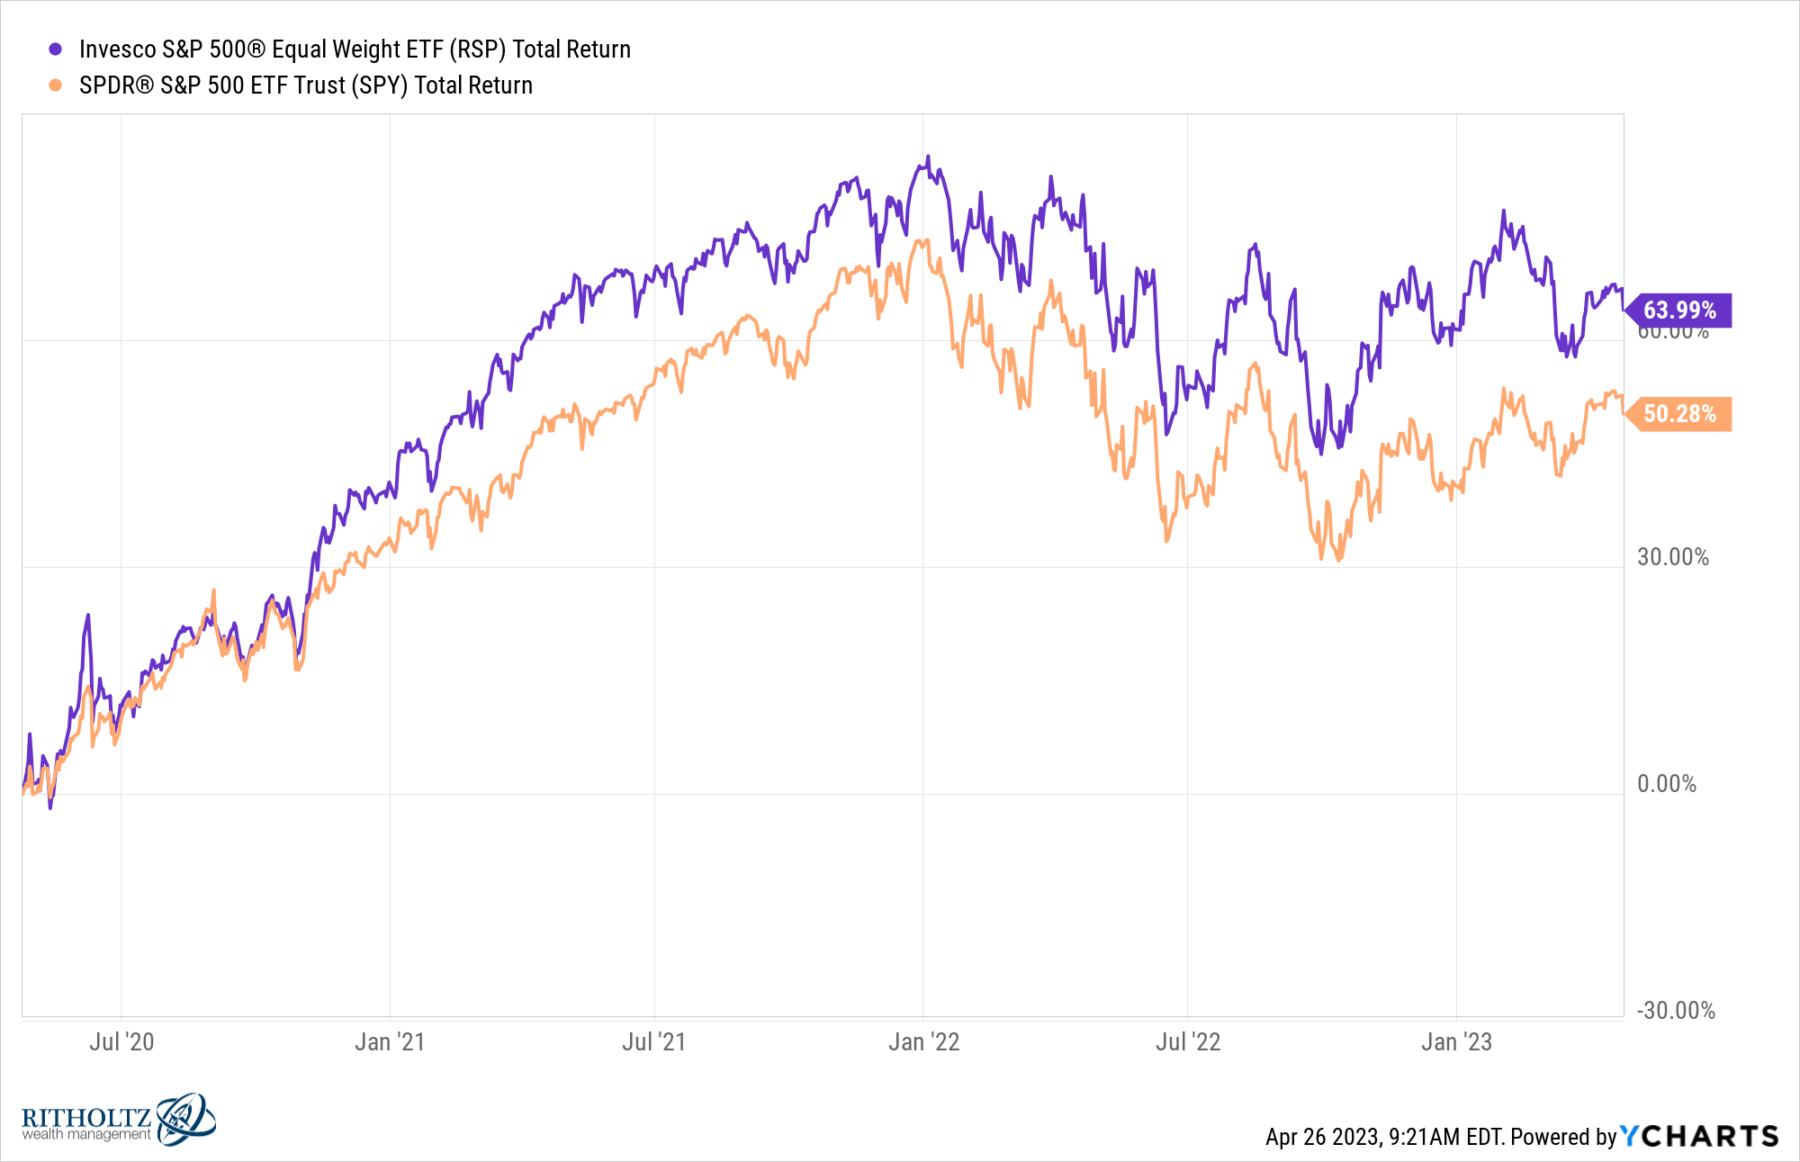 What Does the Relative Performance of Equal Weight S&P500 Mean? 3